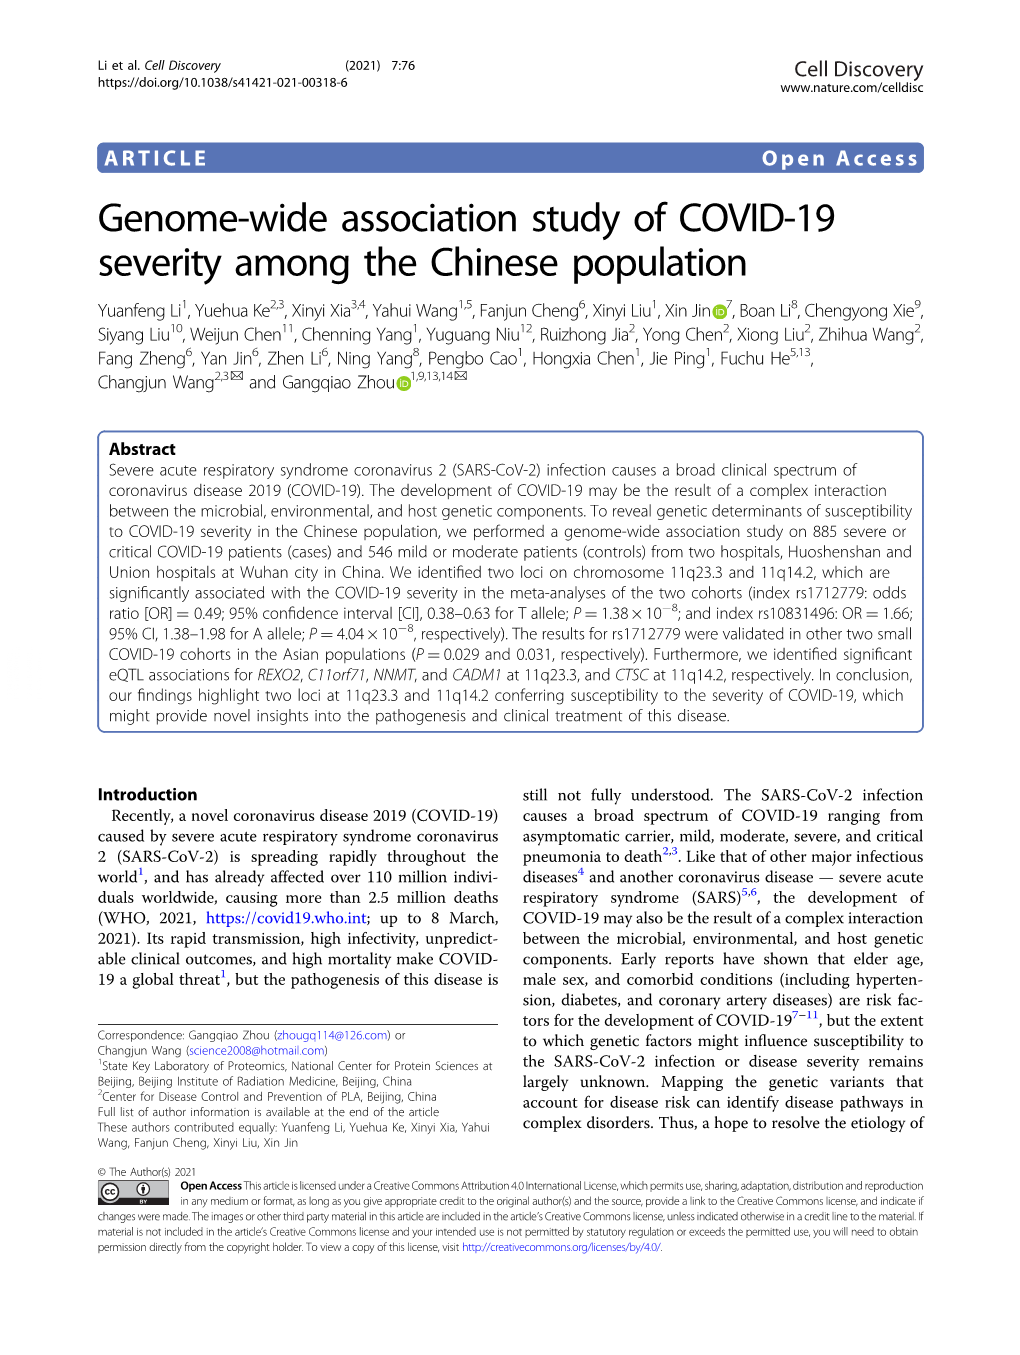 Genome-Wide Association Study of COVID-19 Severity Among